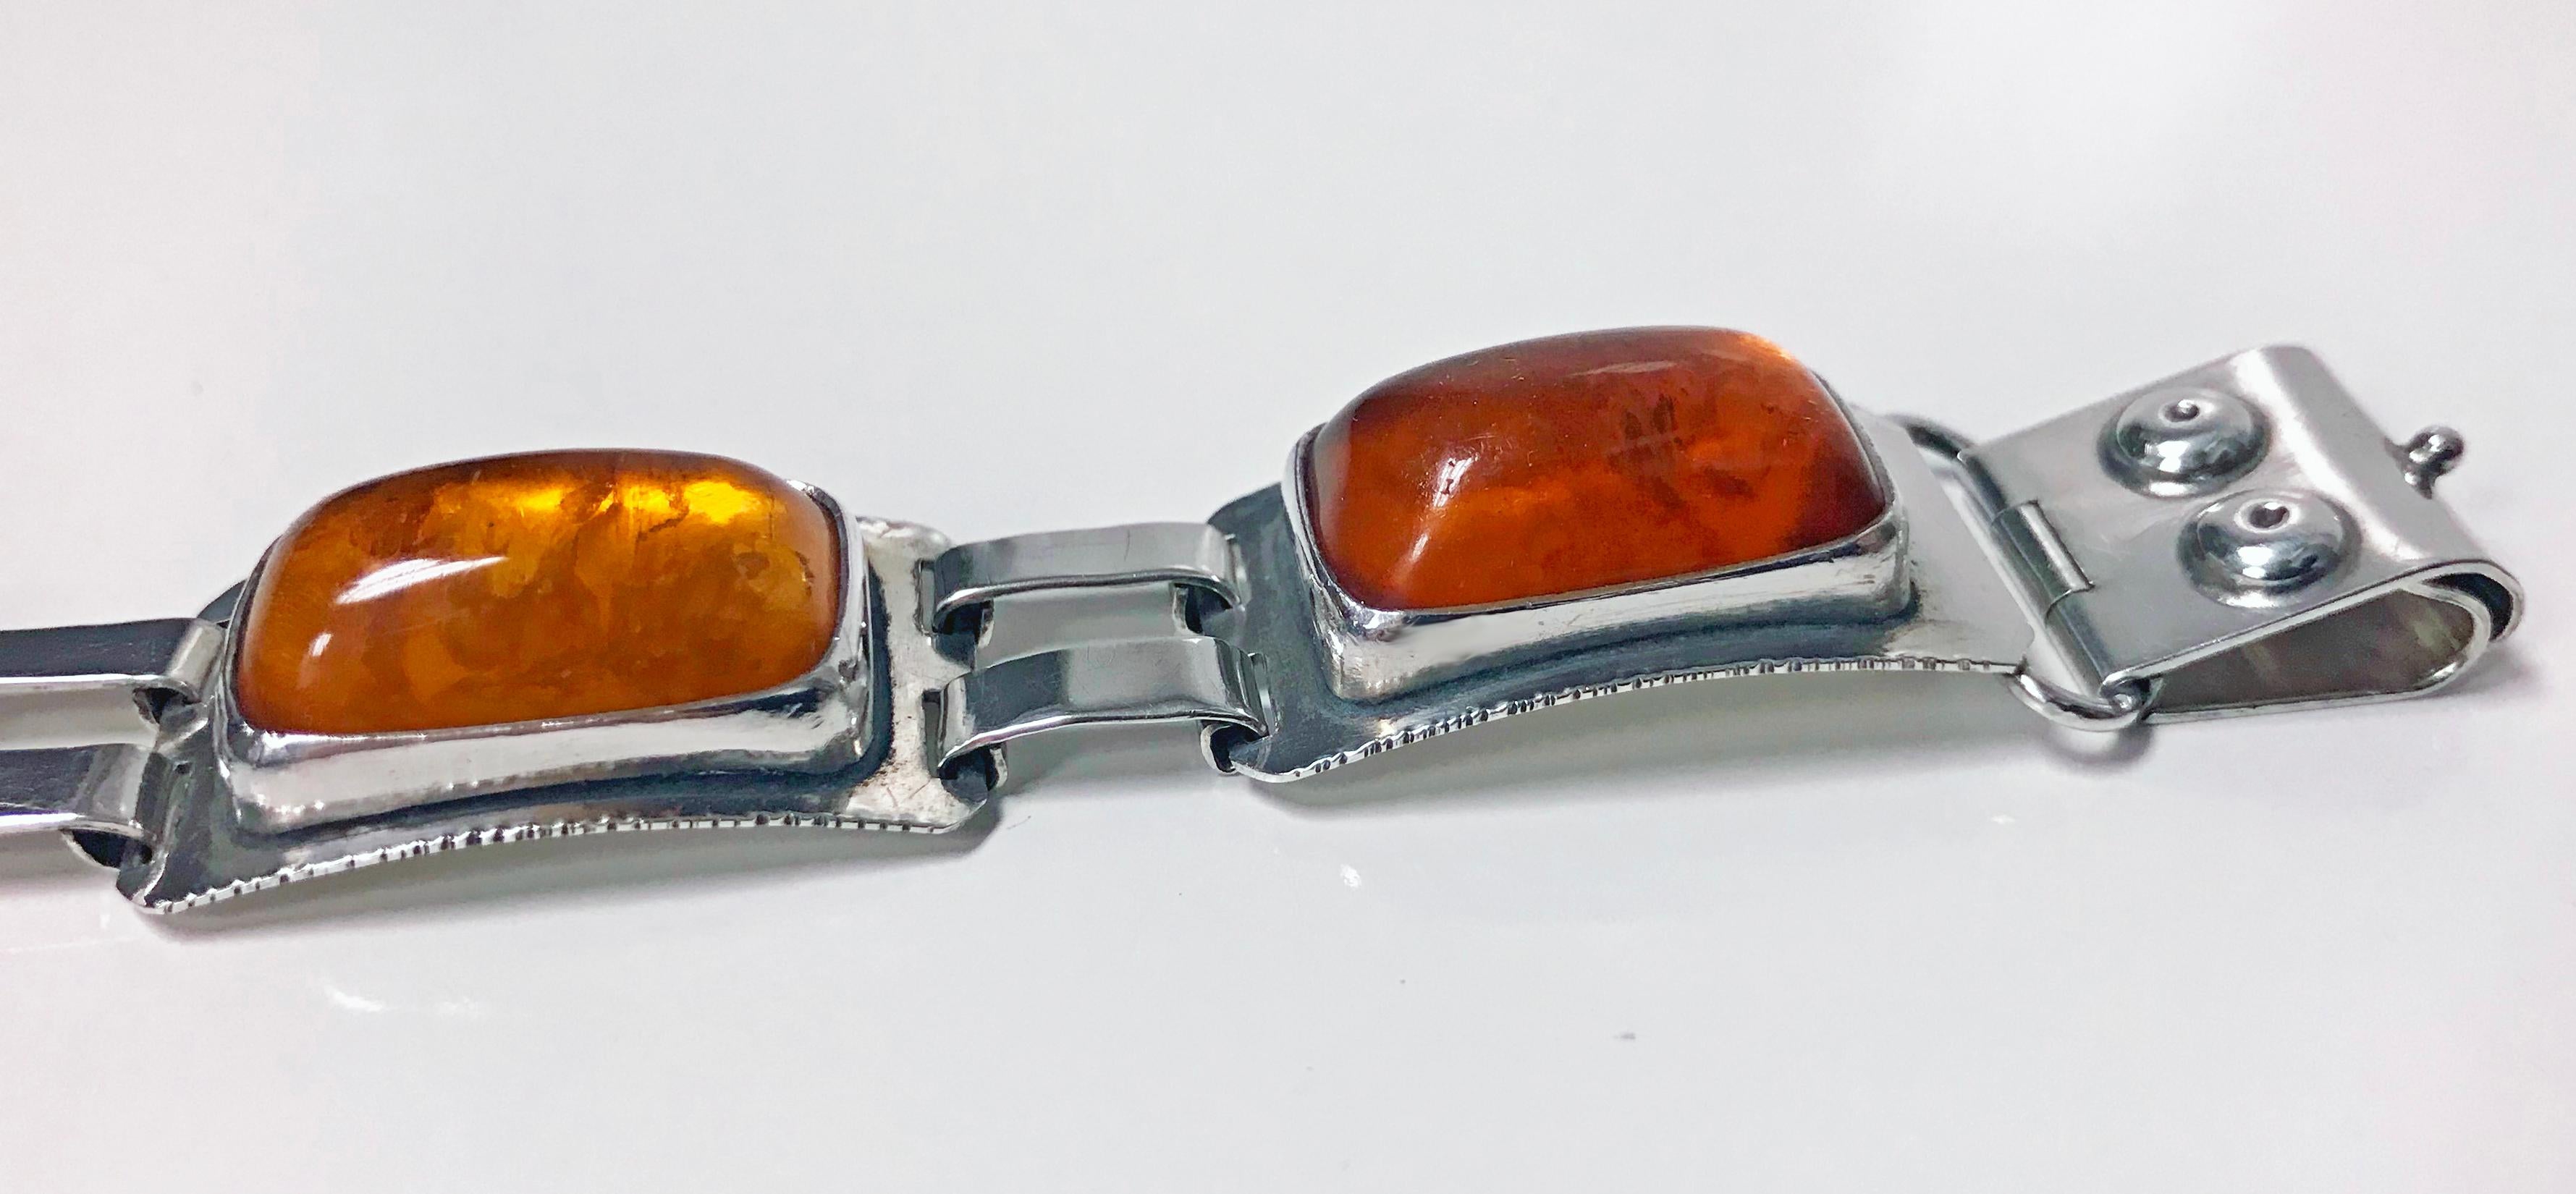 Arts and Crafts George Kramer Amber and Silver Bracelet, Germany C.1920. Georg Kramer was founded in 1771 and continued for four generations until 1932, thereafter continued by Walter Kramer. In 1890, the hallmark 